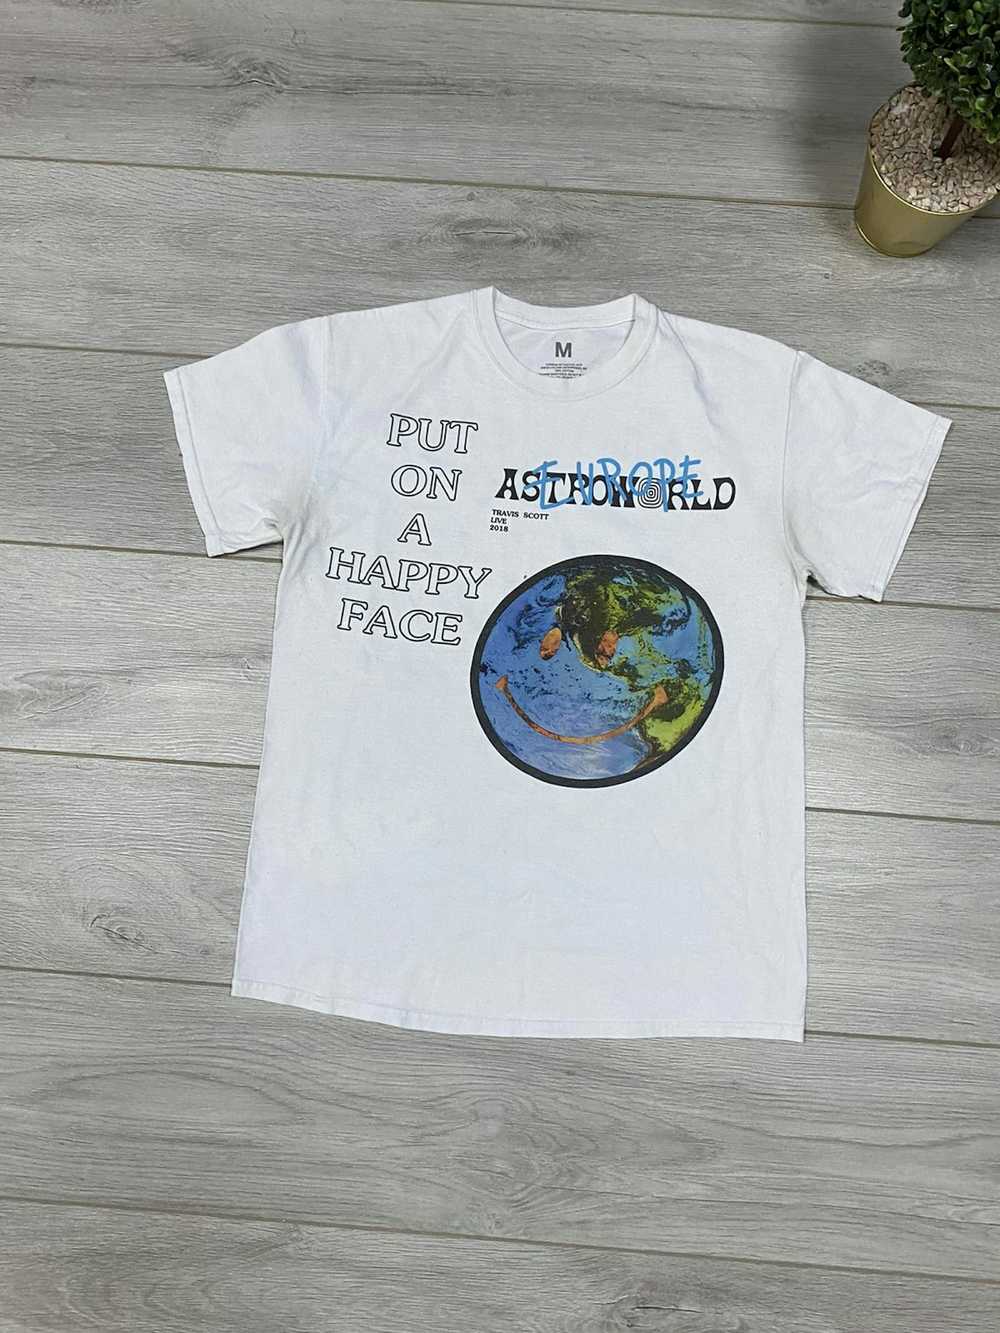 Travis Scott Astroworld Put on a Happy Face Tee - image 4